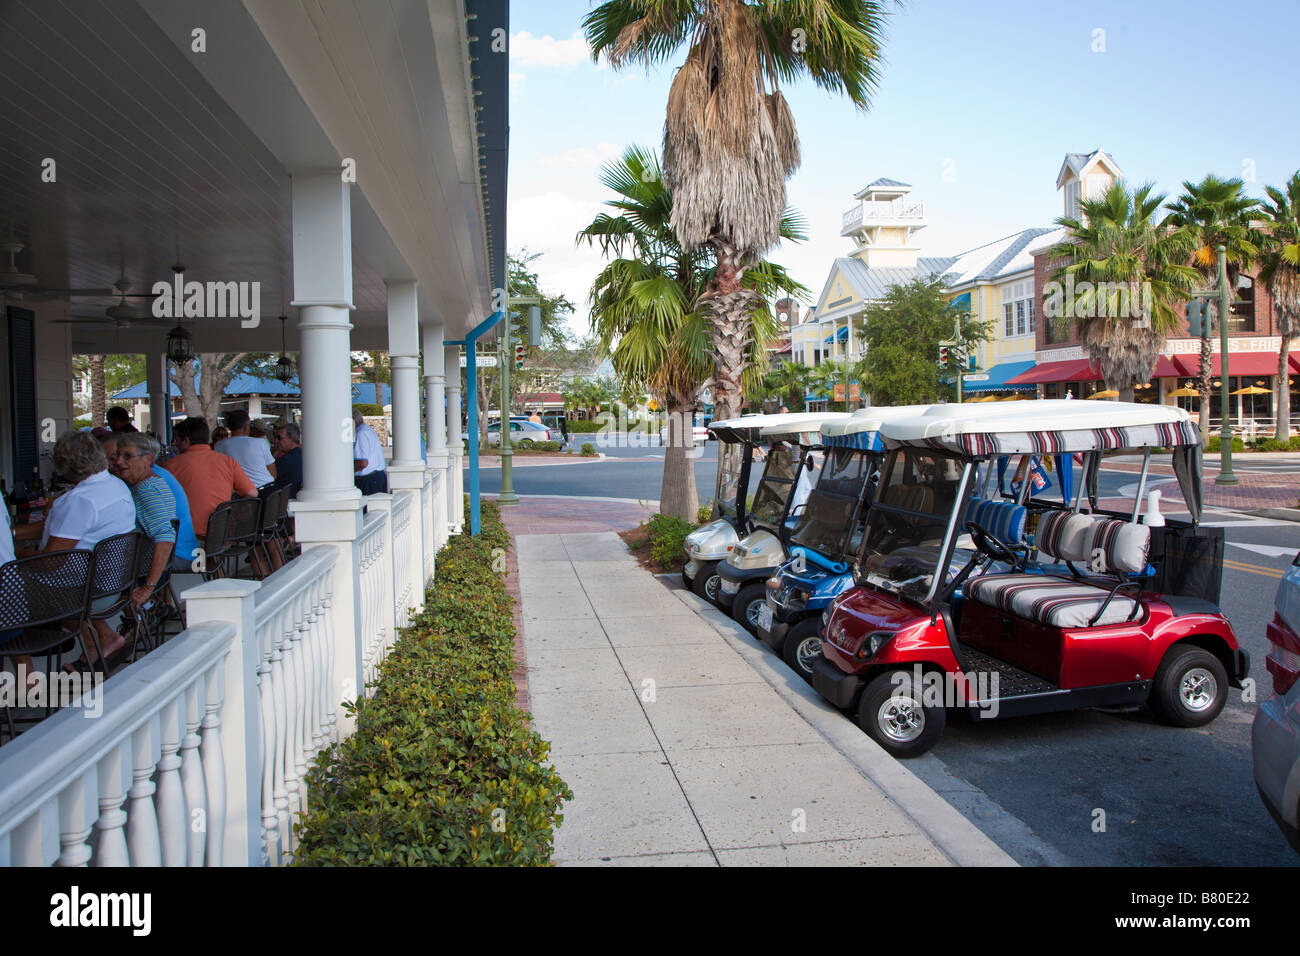 Golf carts lined up at the curb of a local outdoor bar in The Villages retirement community in Central Florida, USA Stock Photo